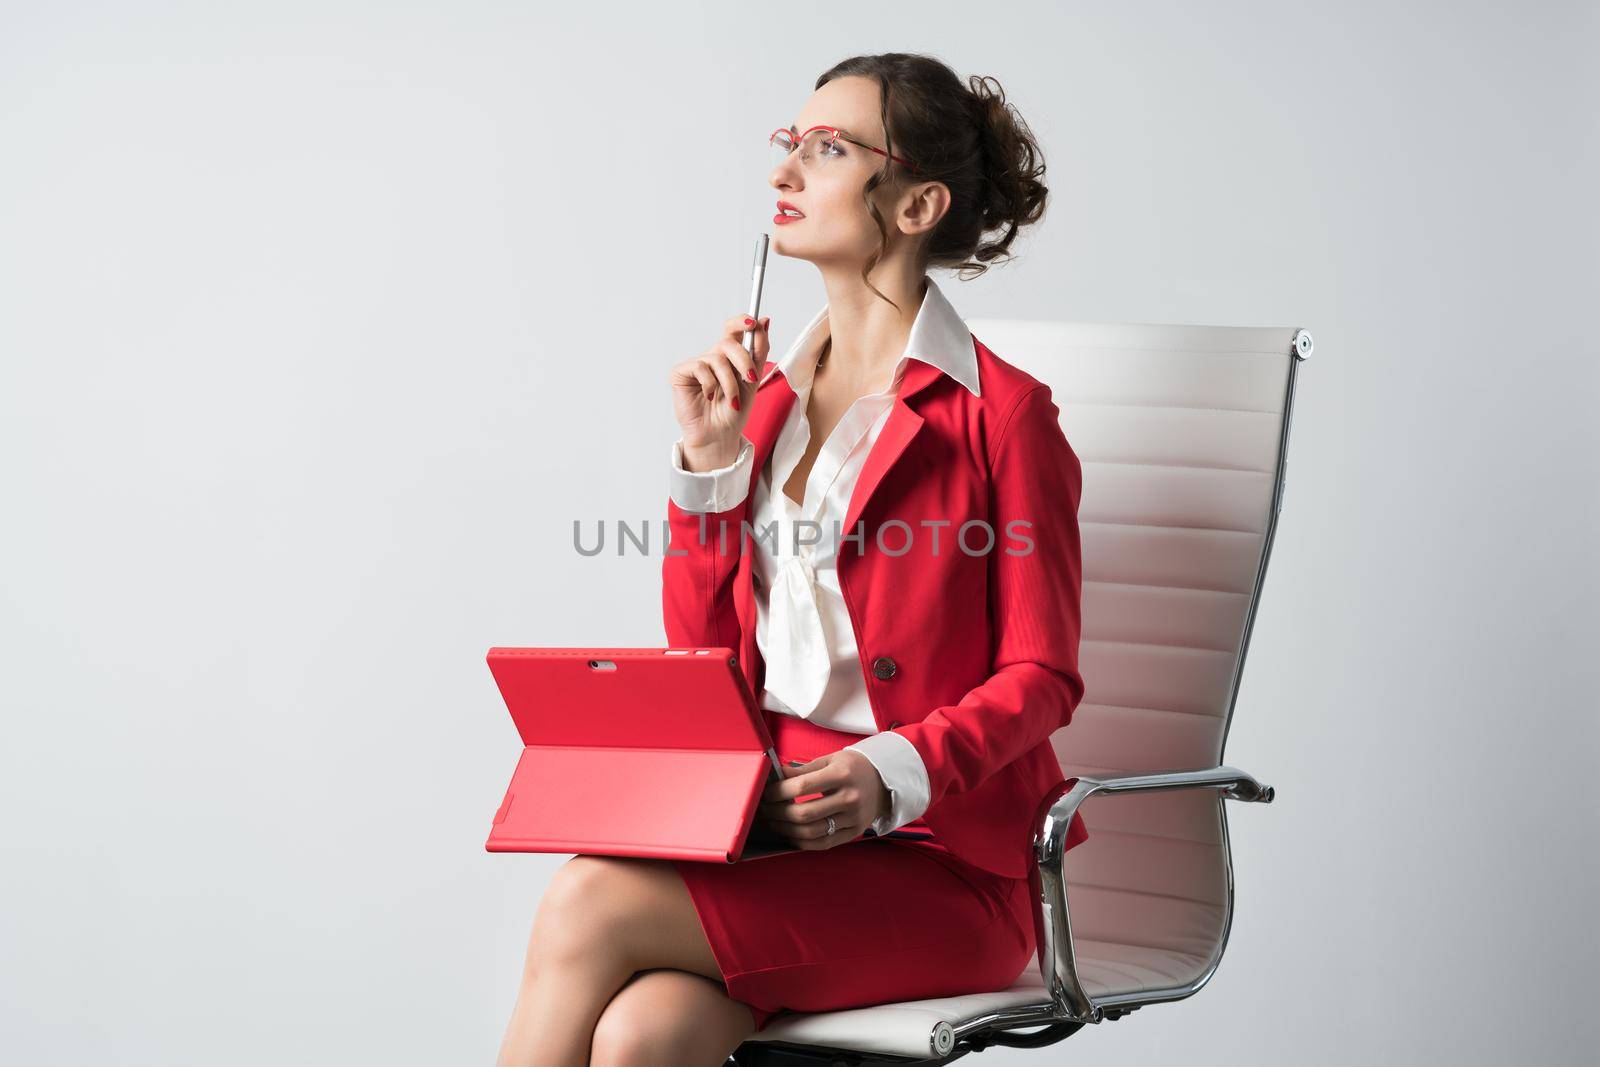 Businesswoman with laptop computer thinking by Kzenon